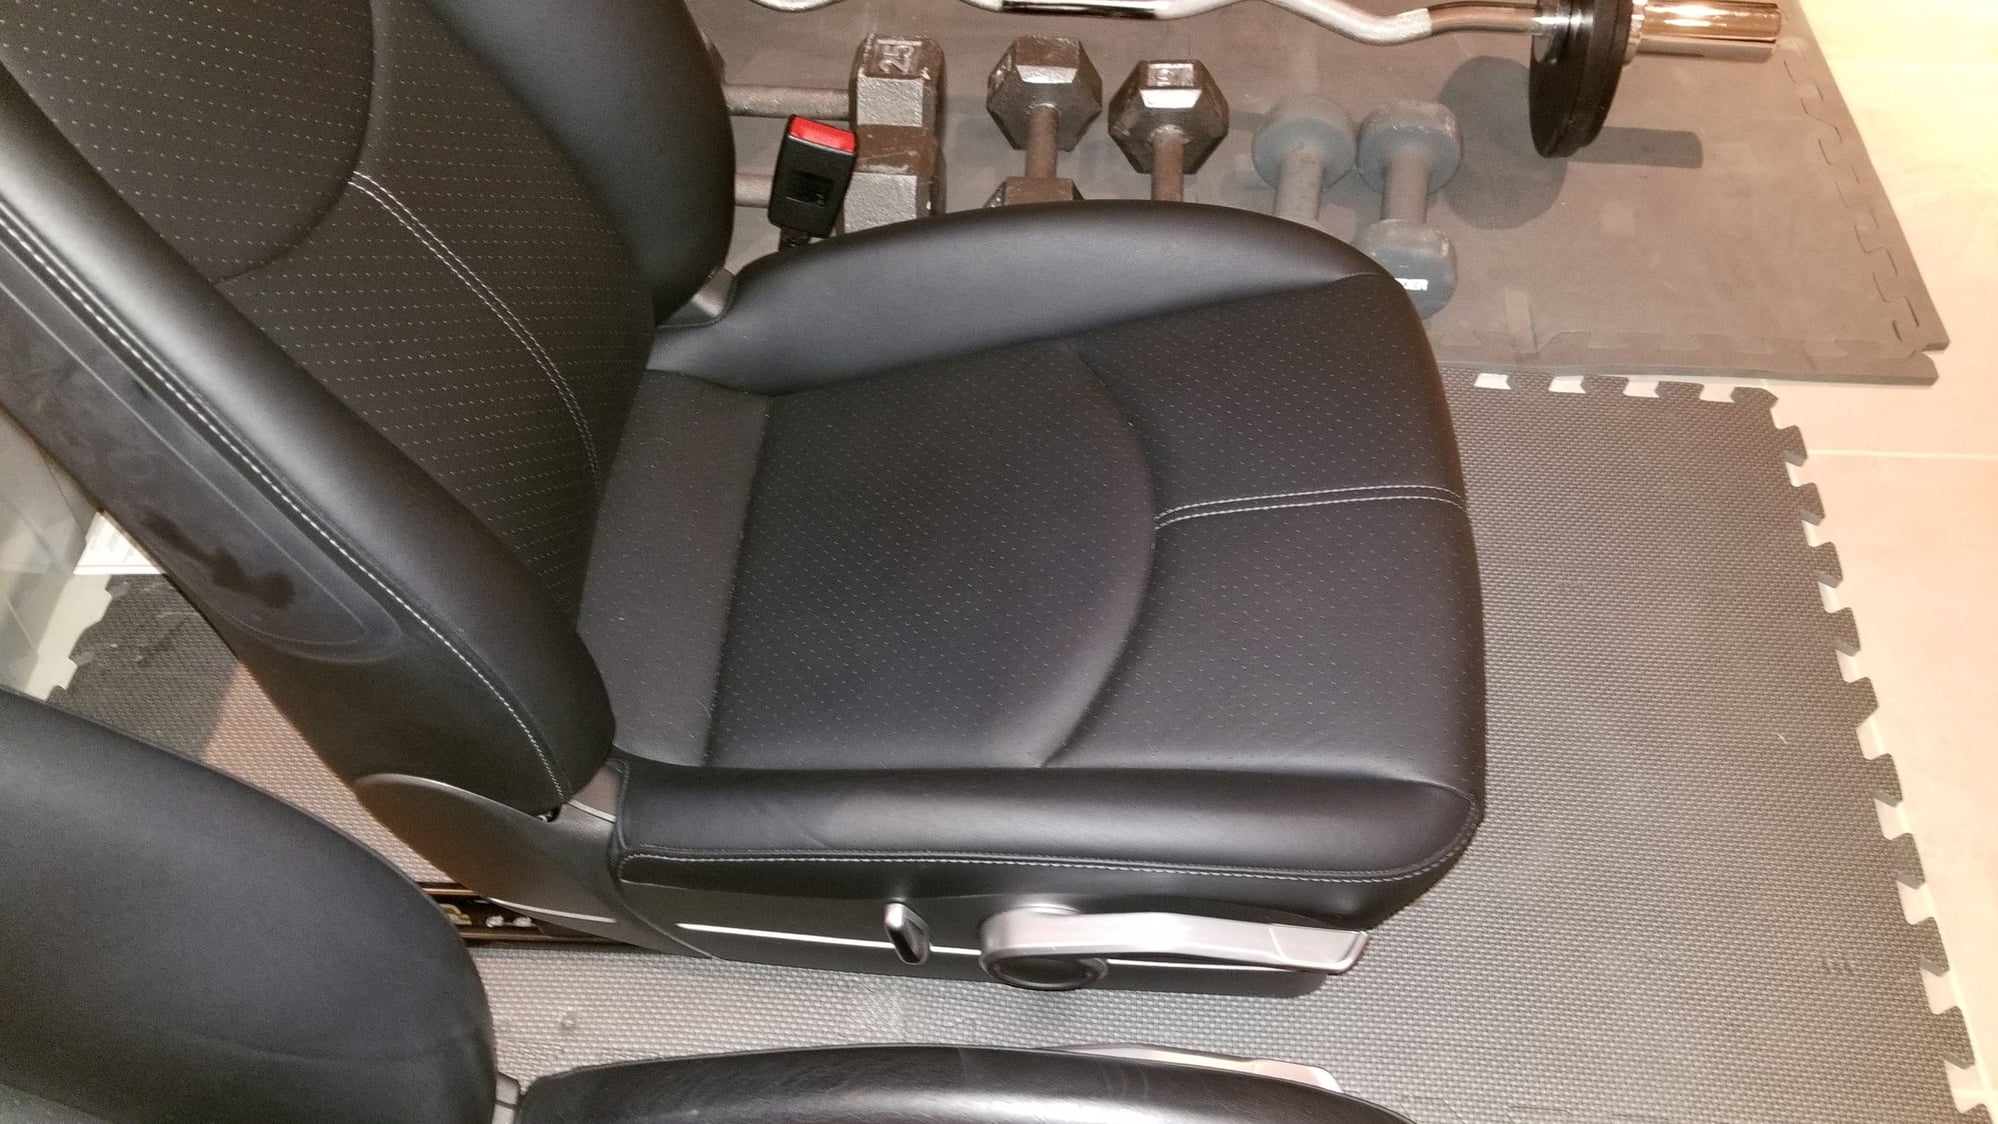 Interior/Upholstery - 2009 Cayman S seats for sale - Used - 2009 Porsche Cayman - East Greenwich, RI 02818, United States